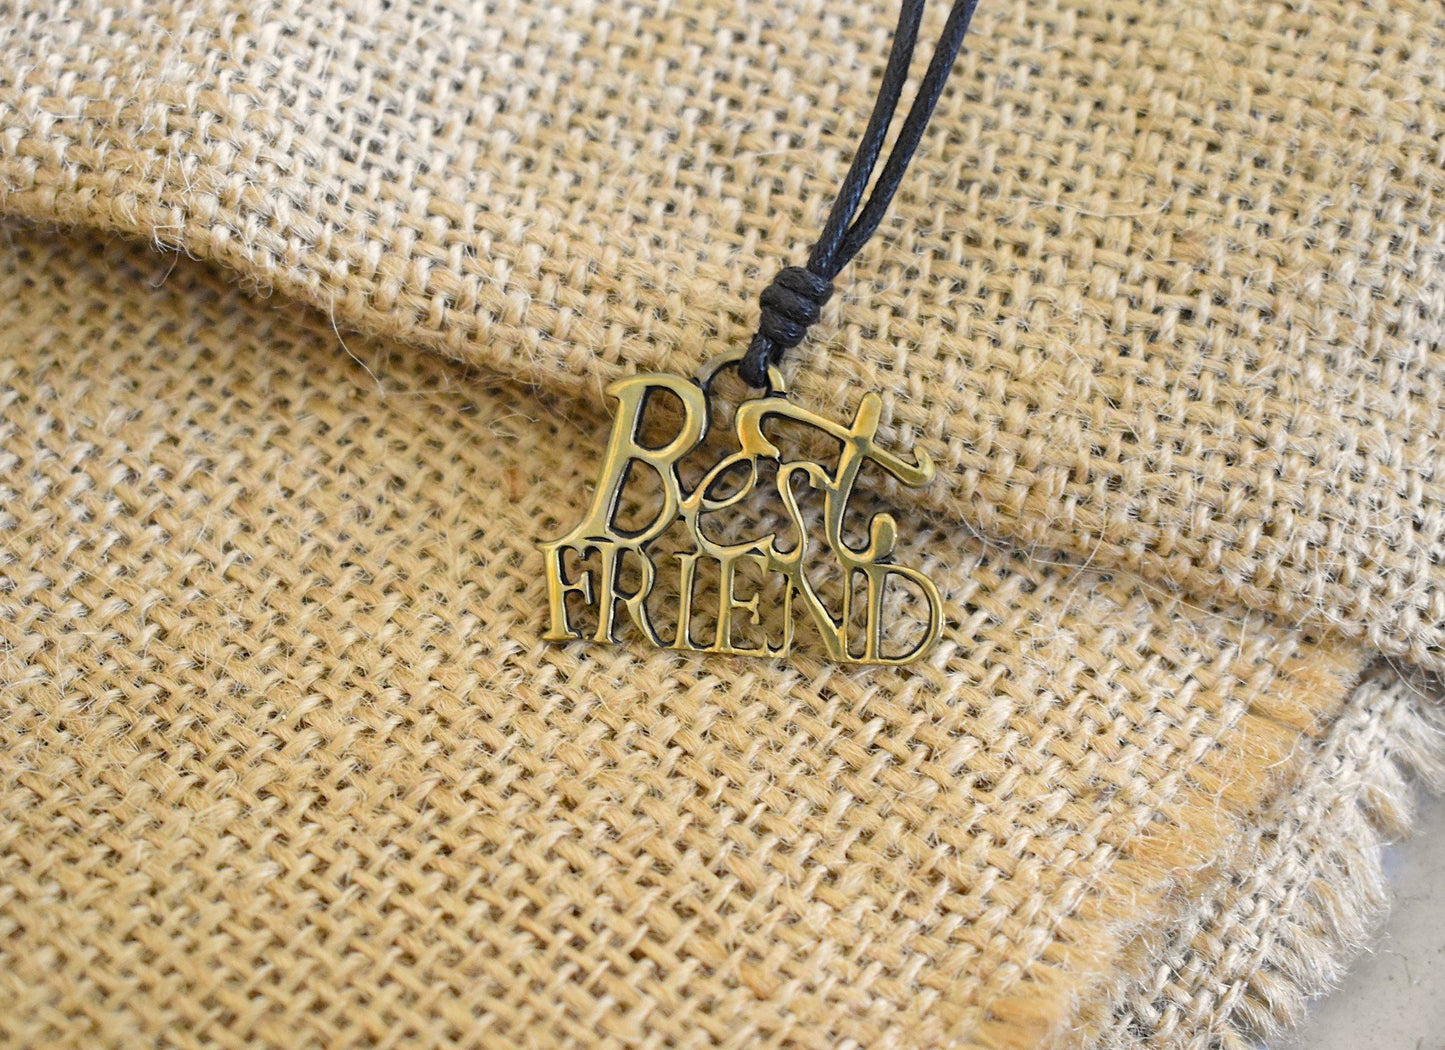 Best Friend Silver Pewter Gold Brass Charm Necklace Pendant